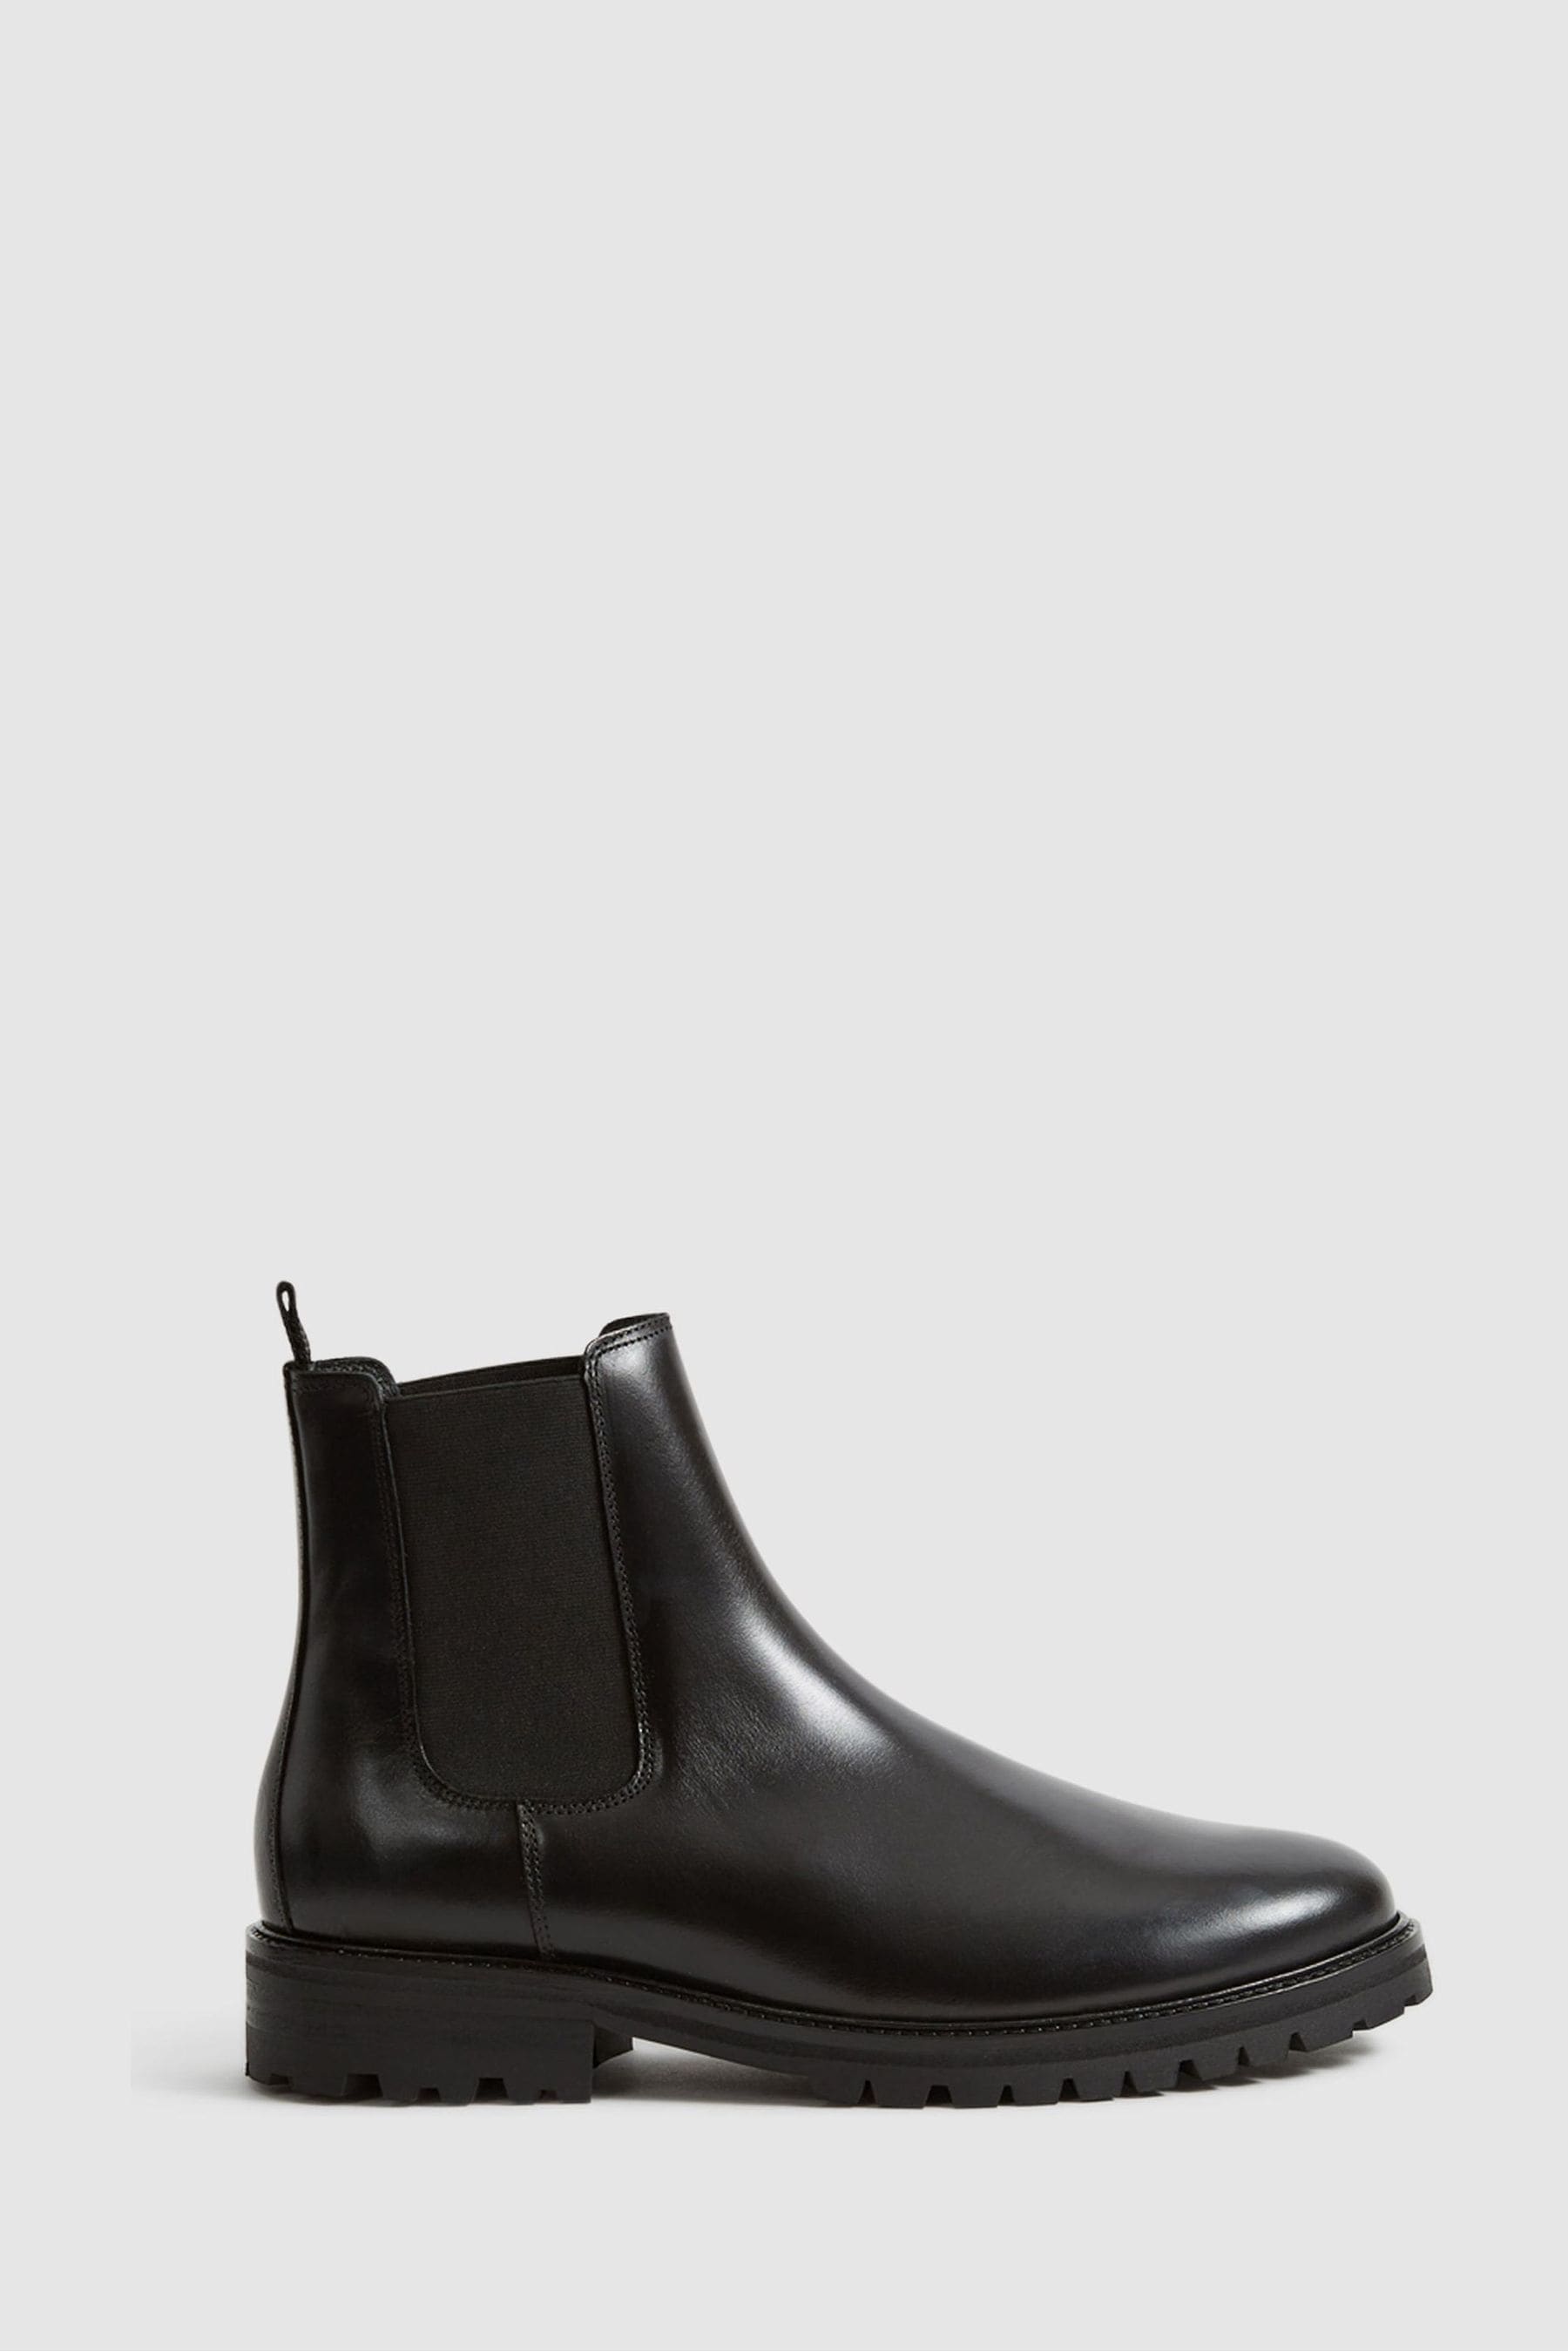 Reiss Mens Black Tenor Leather Chelsea Boots